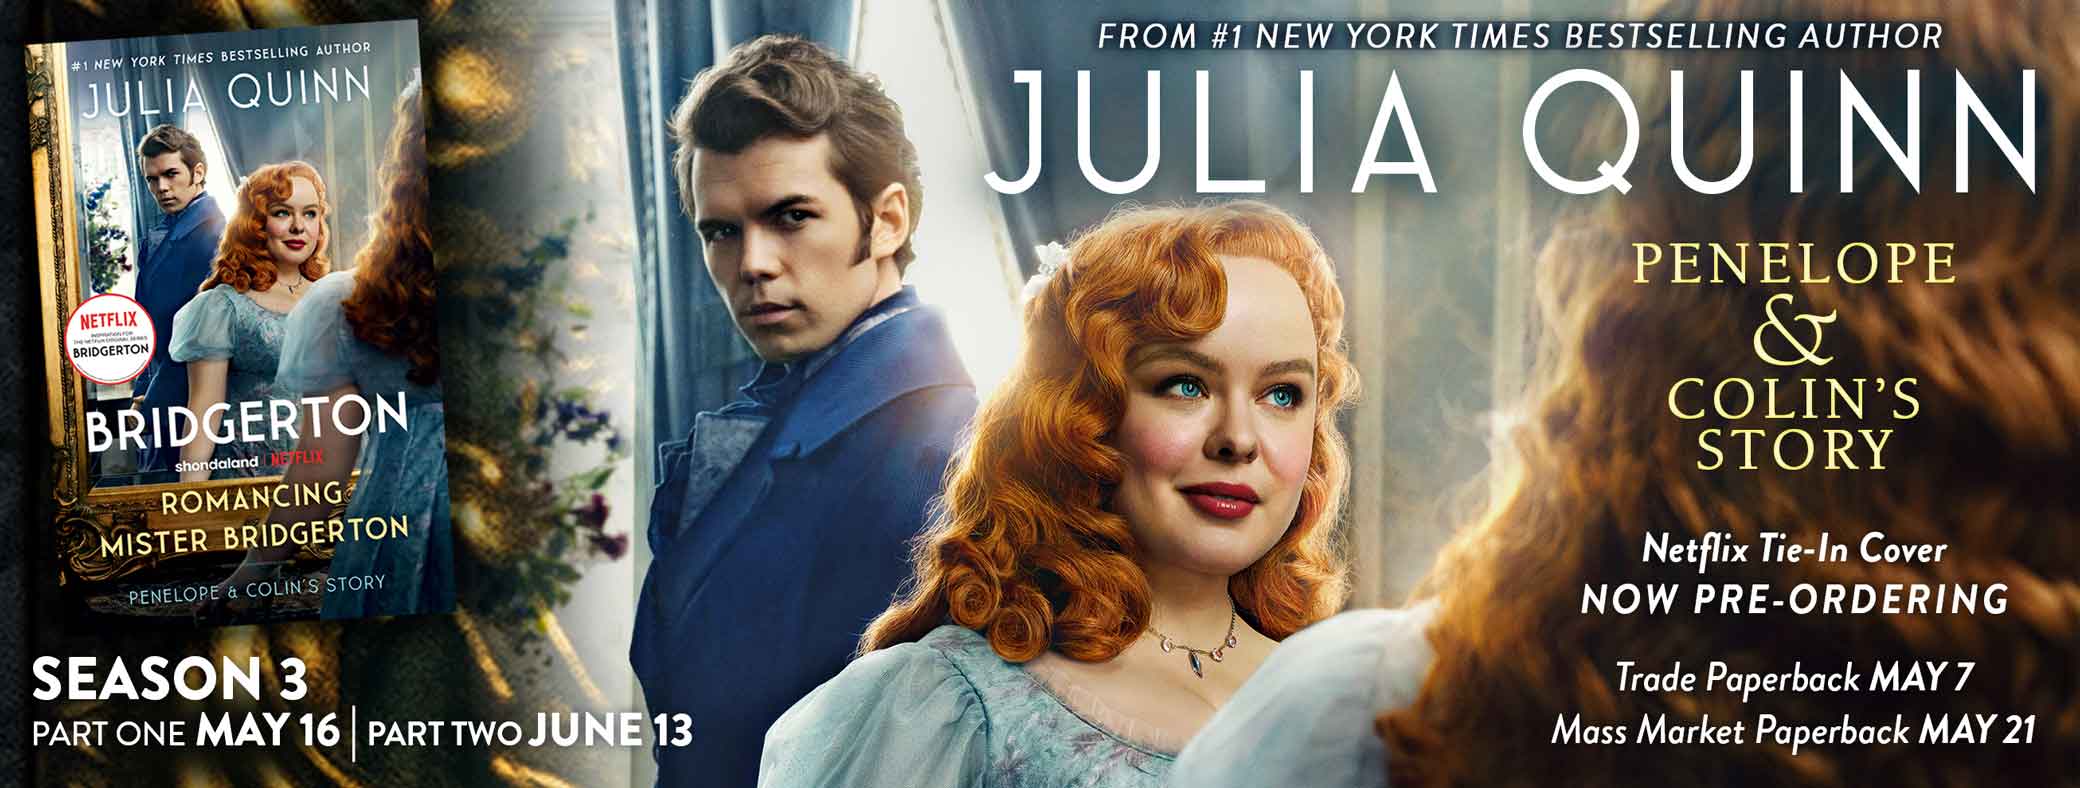 From #1 New York Times bestselling author Julia Quinn | Penelope & Colin's Story | Netflix Tie-In Cover Now Pre-Ordering | Trade Paperback May 7, Mass Market Paperback May 21 | Season 3: Part 1 May 16, Part 2 June 13